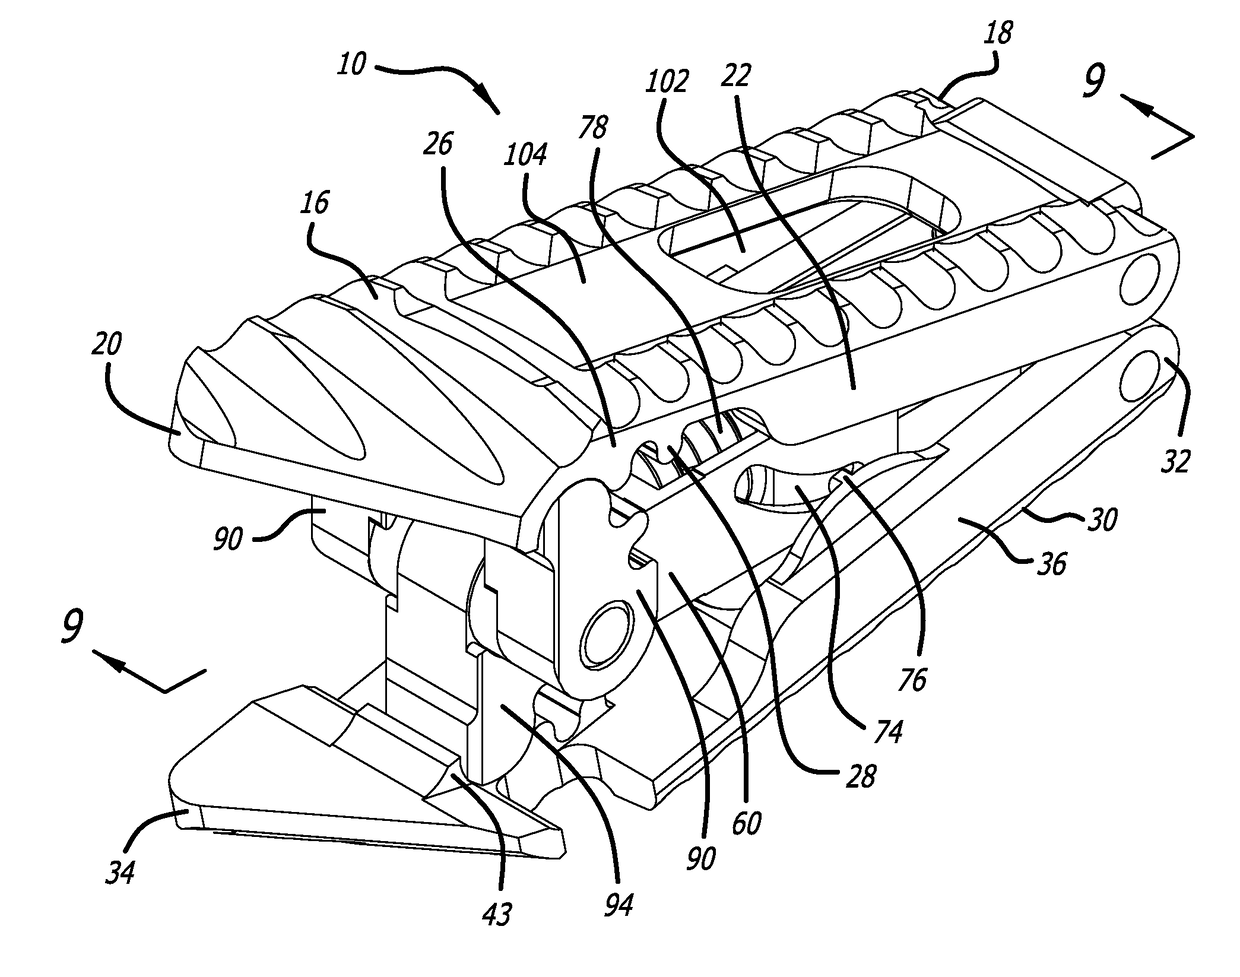 Geared cam expandable interbody implant and method of implanting same